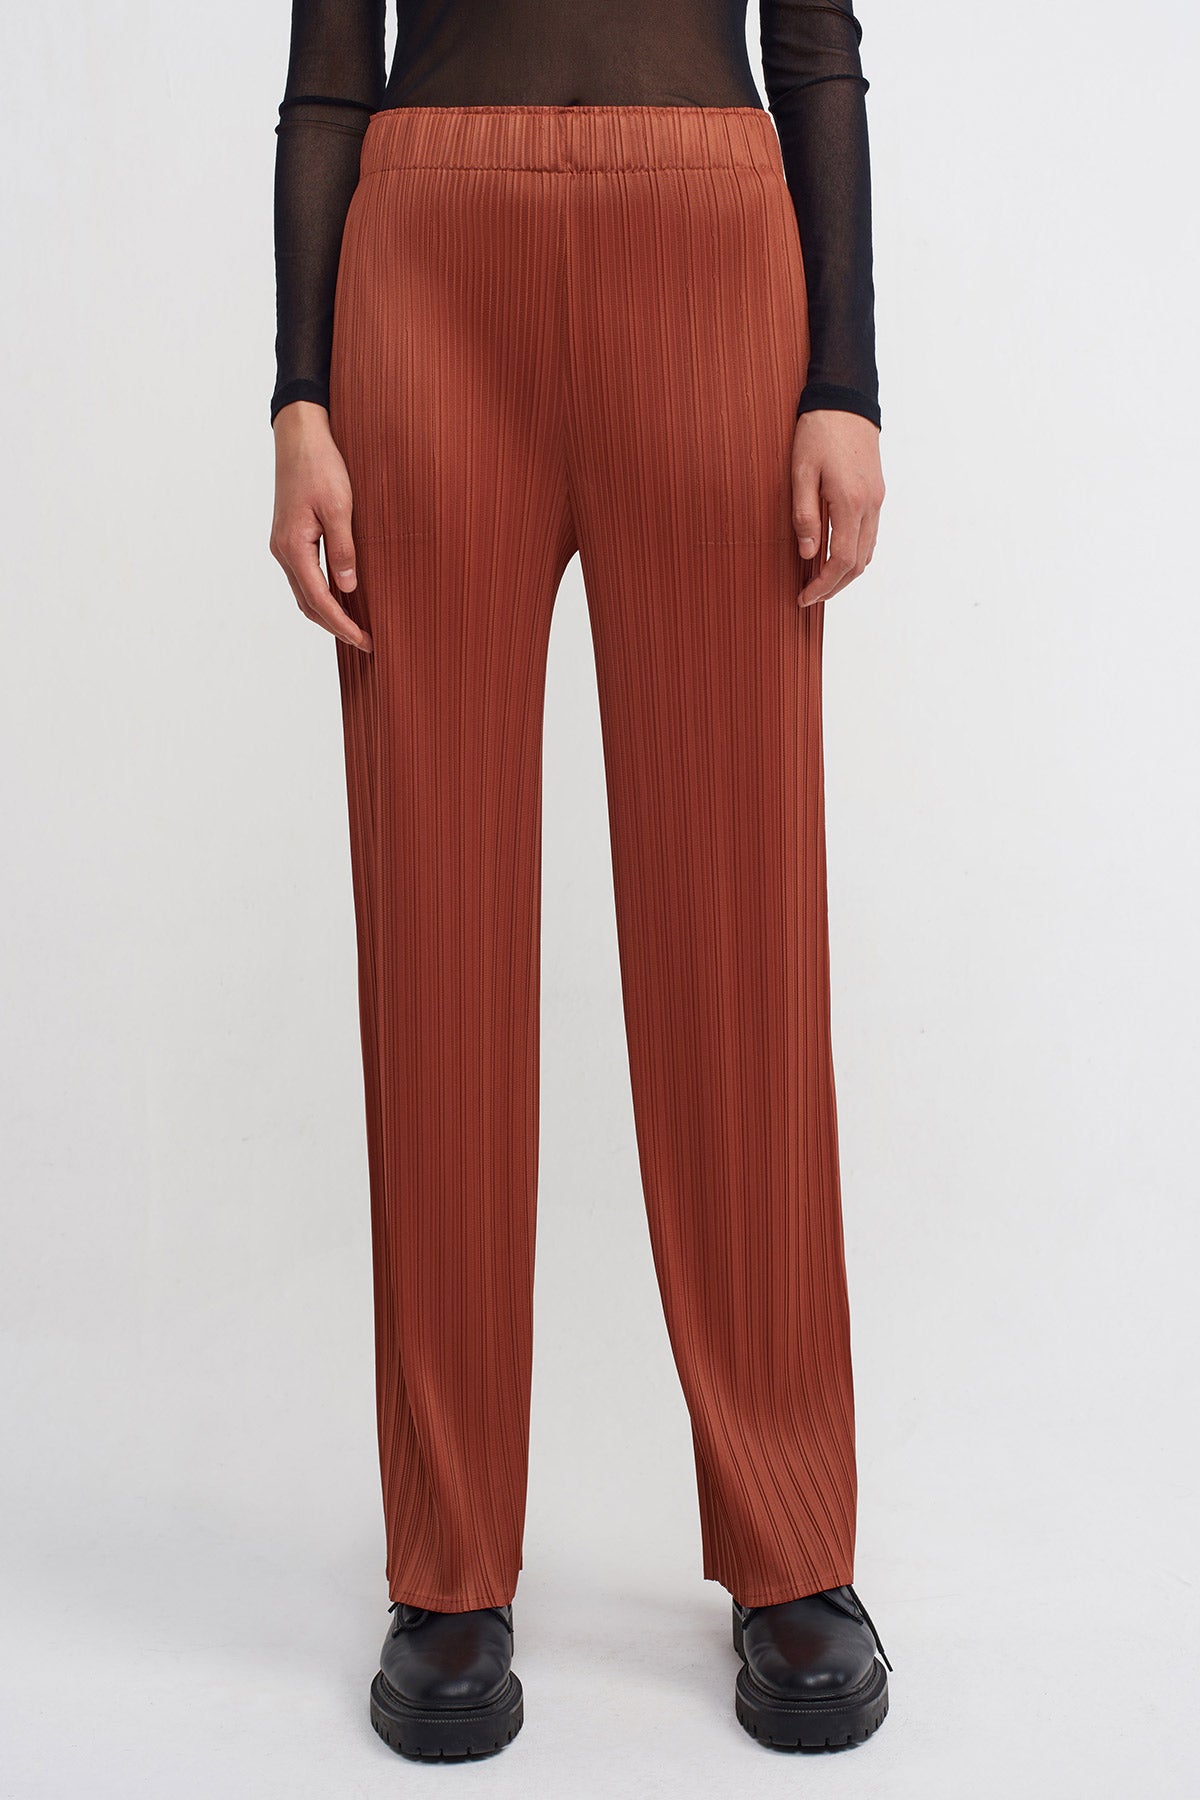 Copper Pleated Trousers-K233013013